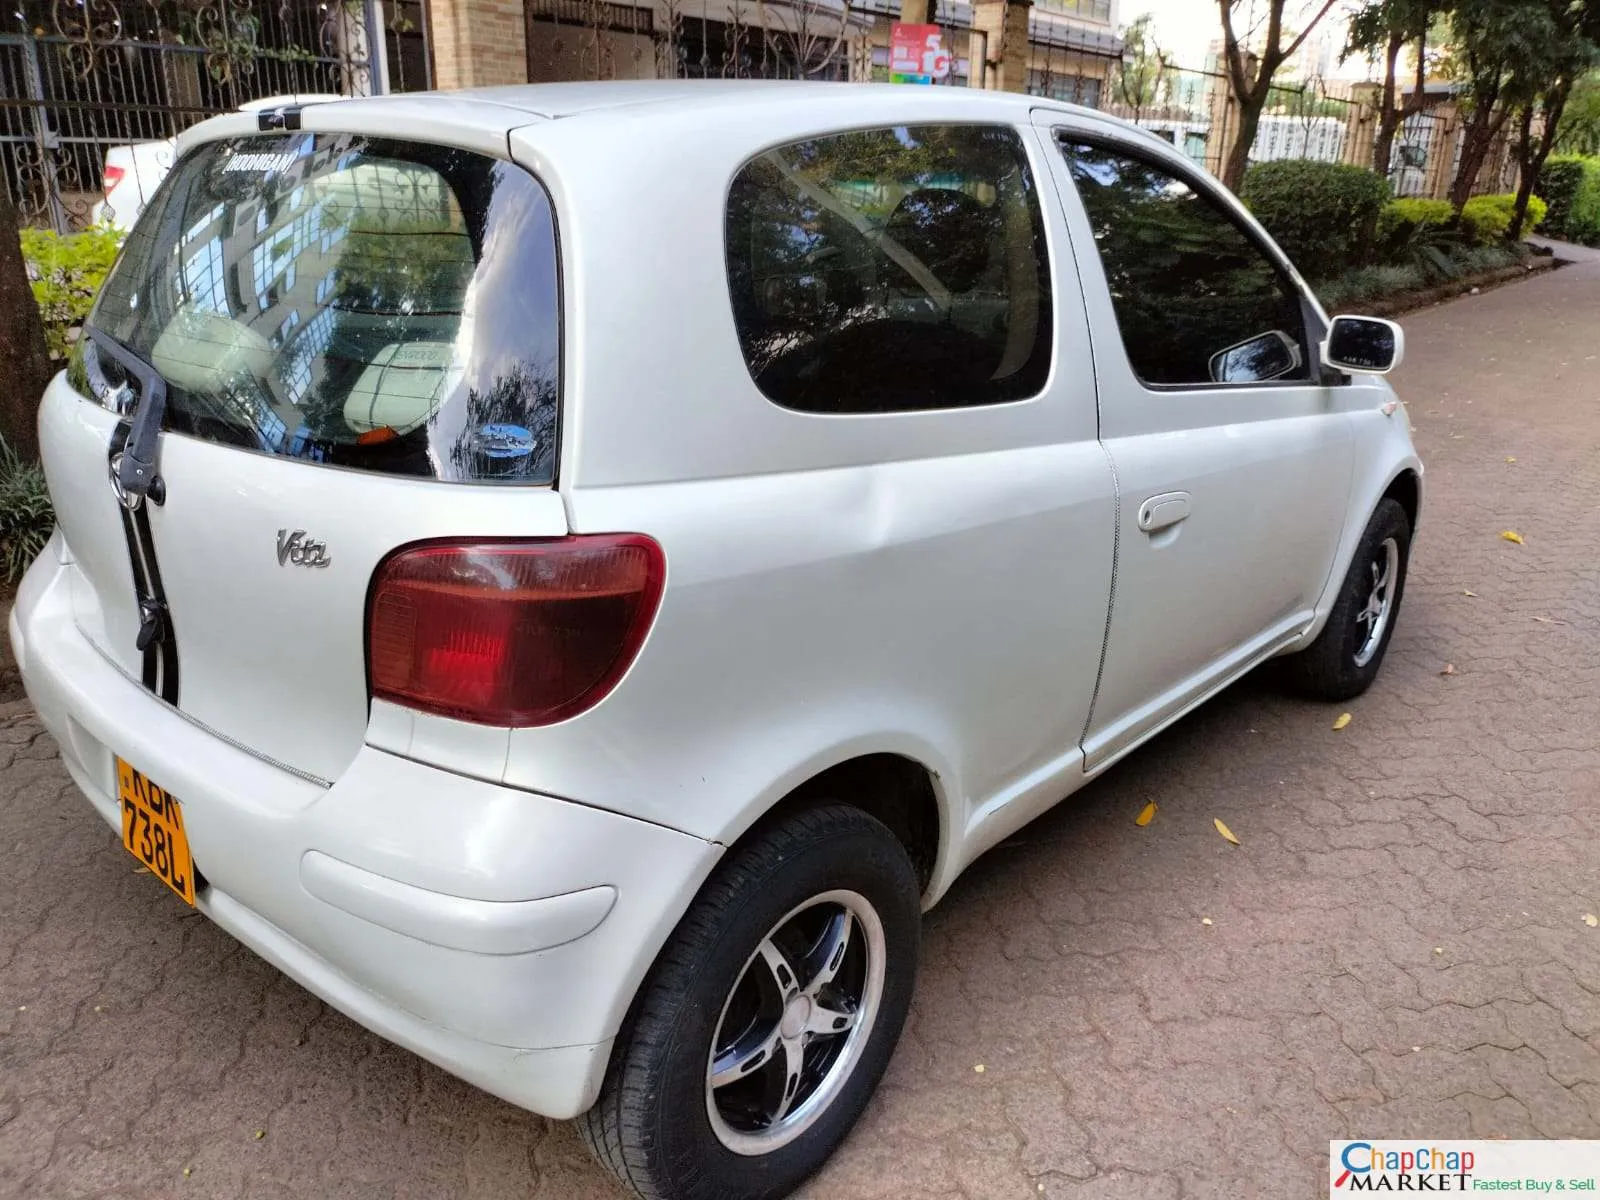 Toyota Vitz QUICK SALE You PAY 30% Deposit INSTALLMENTS Trade in Ok Hire purchase installments 2 3 doors New